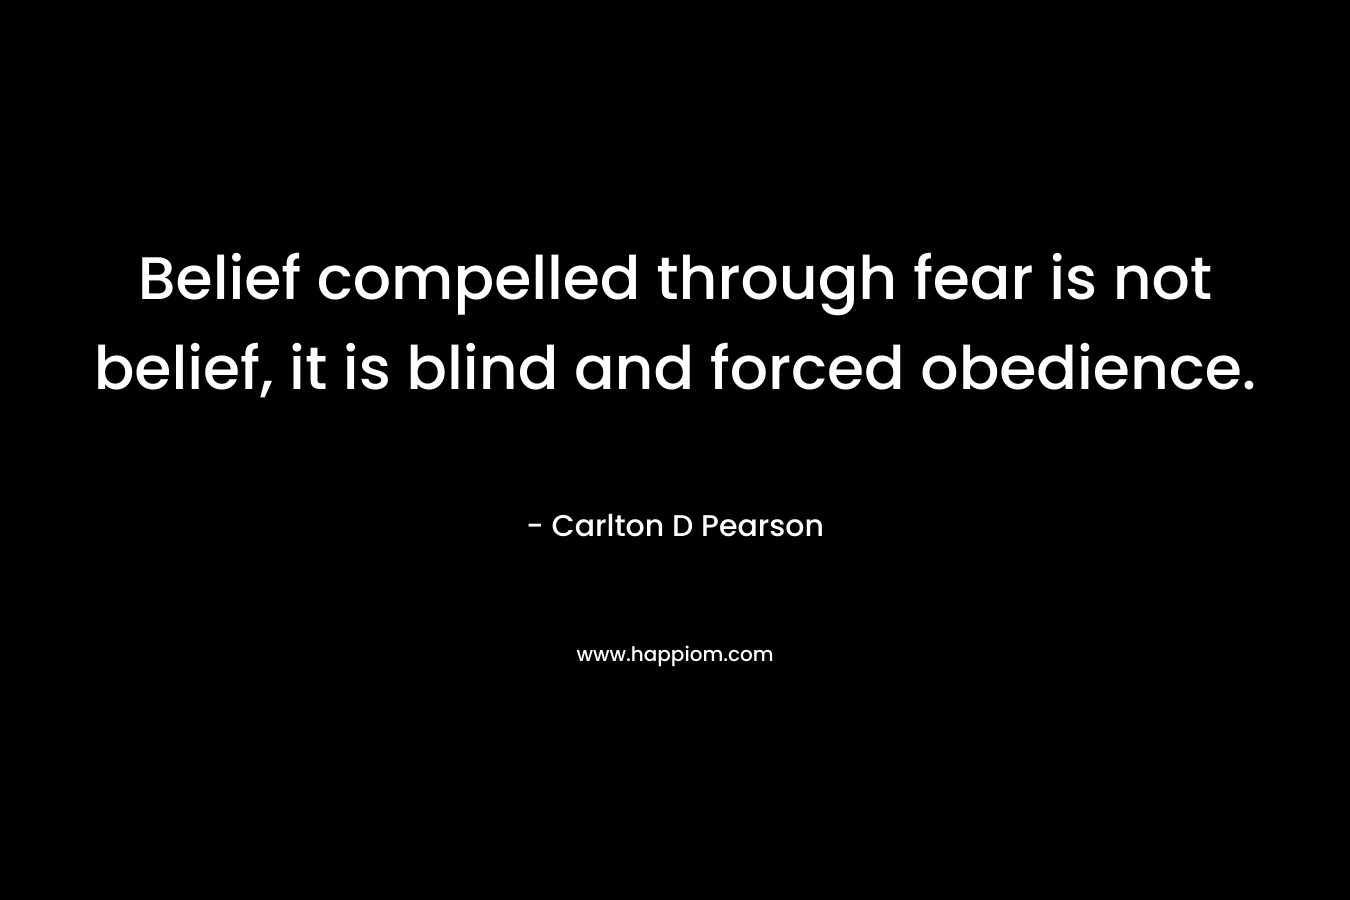 Belief compelled through fear is not belief, it is blind and forced obedience. – Carlton D Pearson